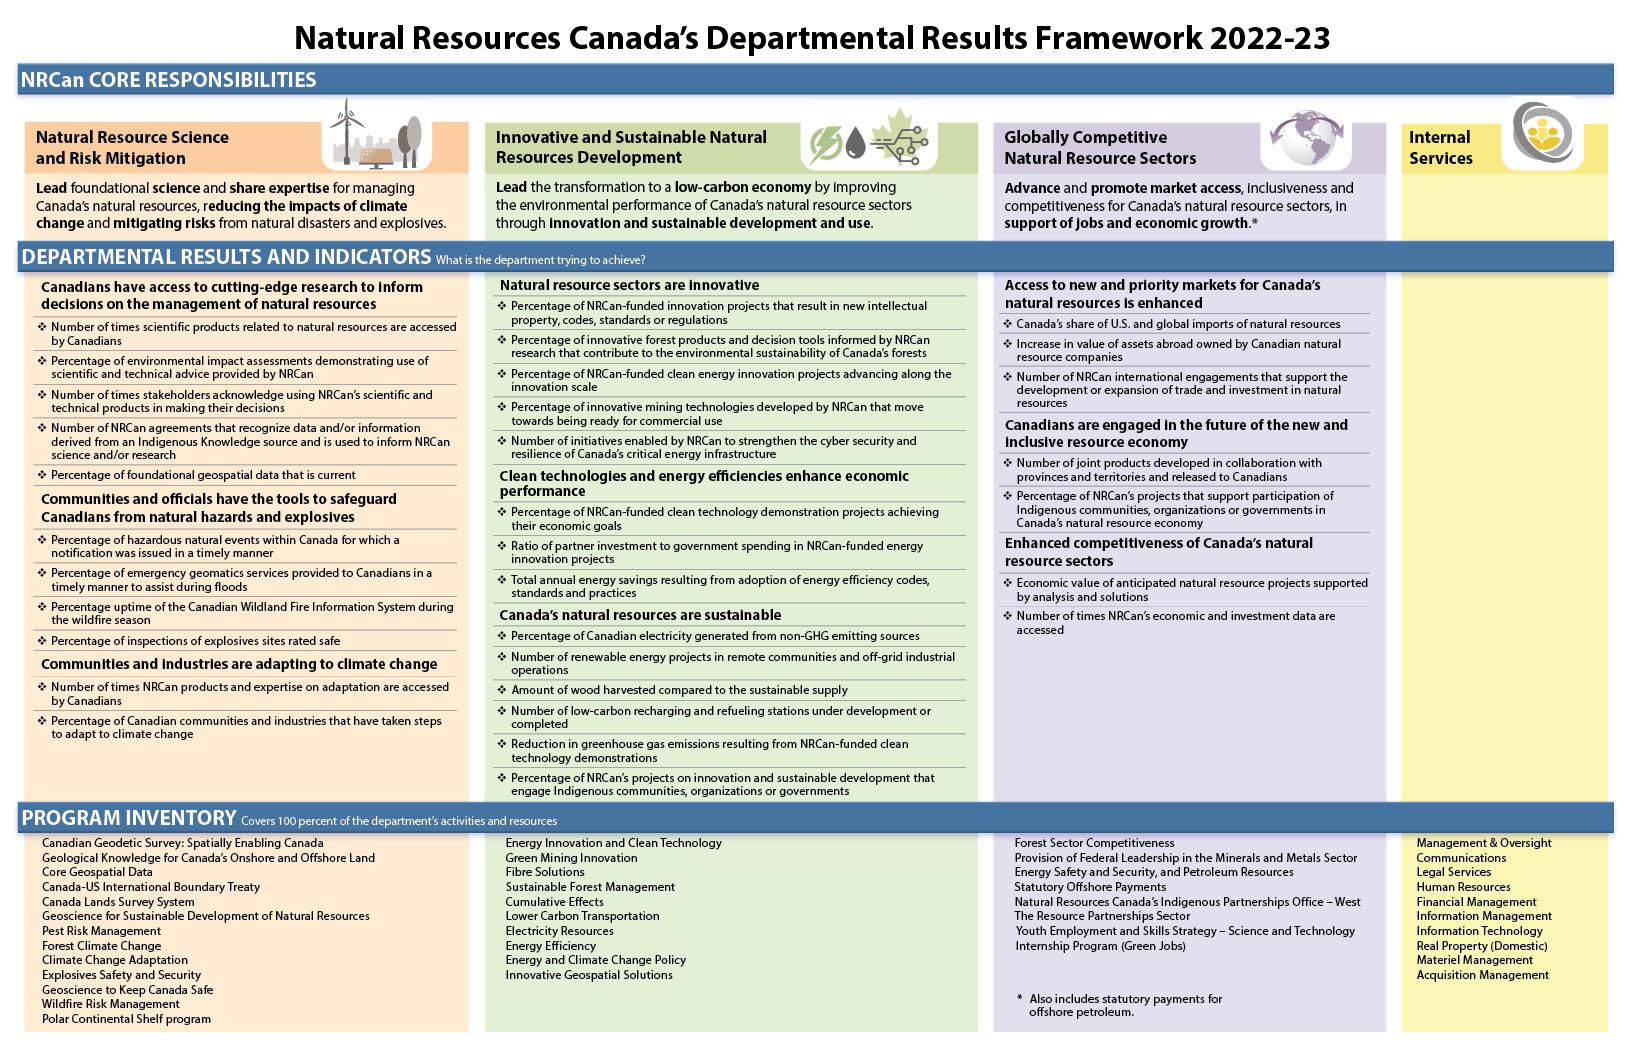 Infographic showing Natural Resources Canada's Departmental Results Frameword for 2022-23